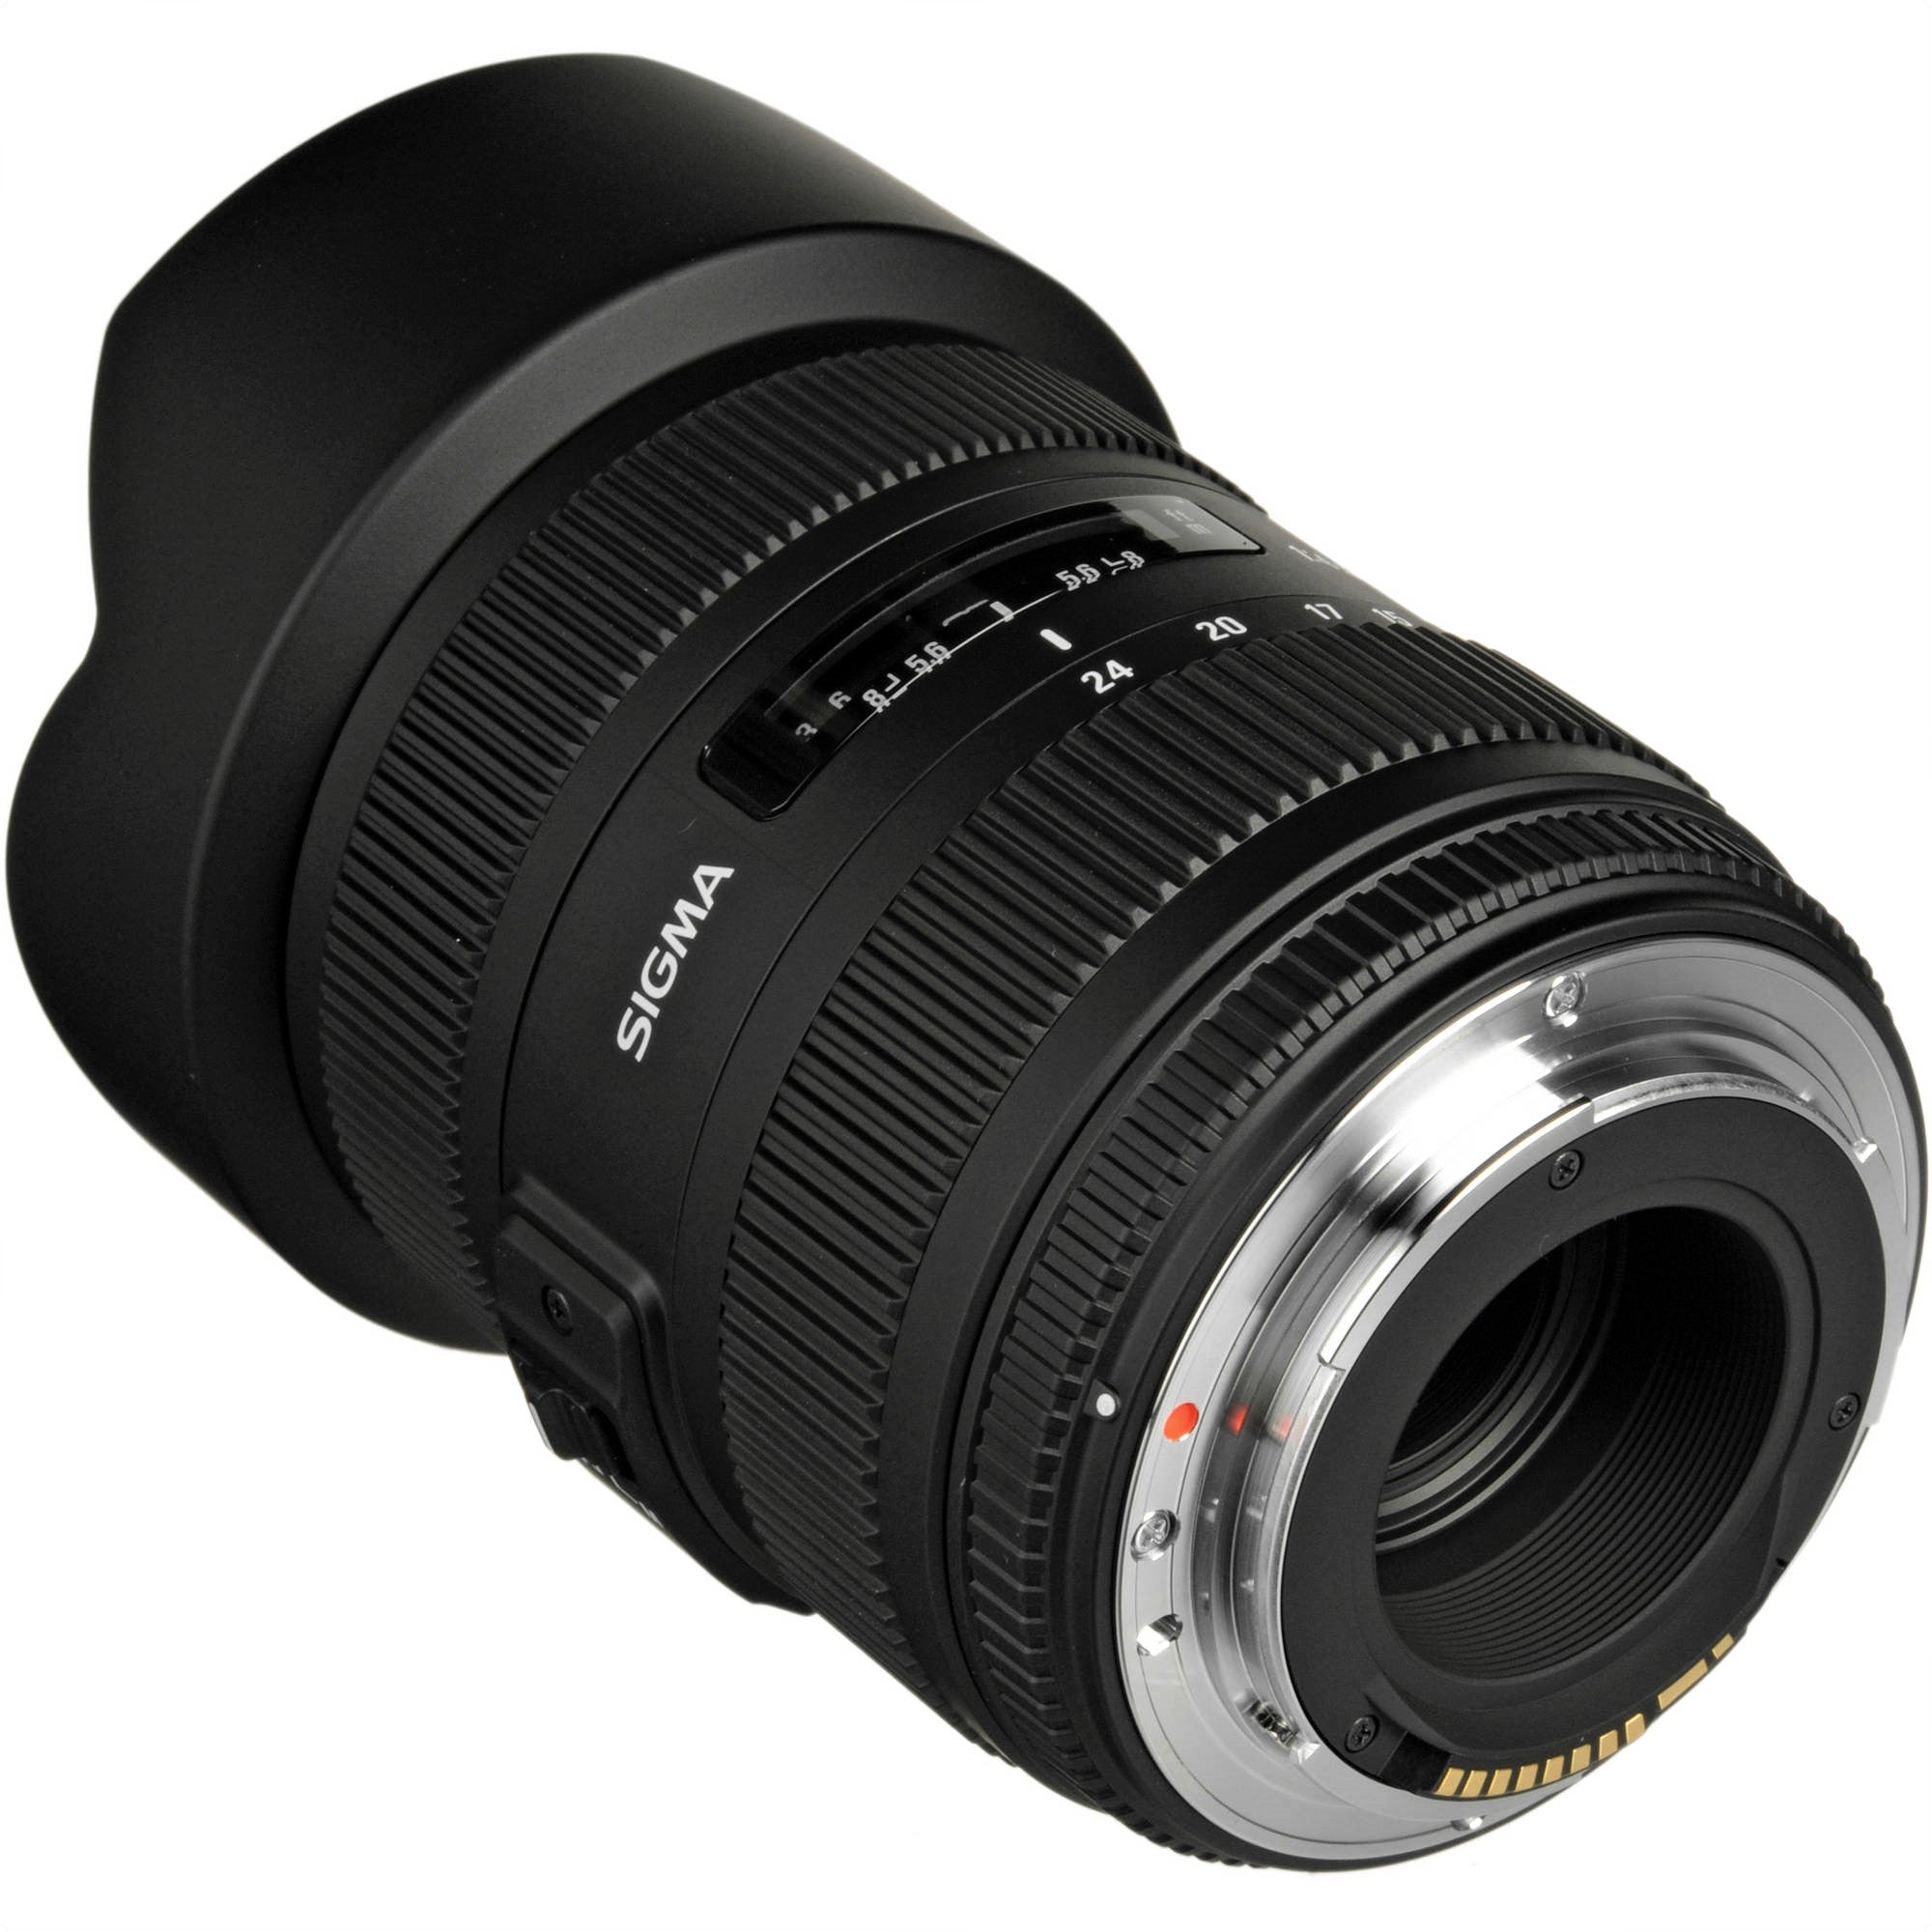 Sigma 12-24mm F4.5-5.6 II EX DG ASP-HSM Lens for Sigma in a Back-Side View